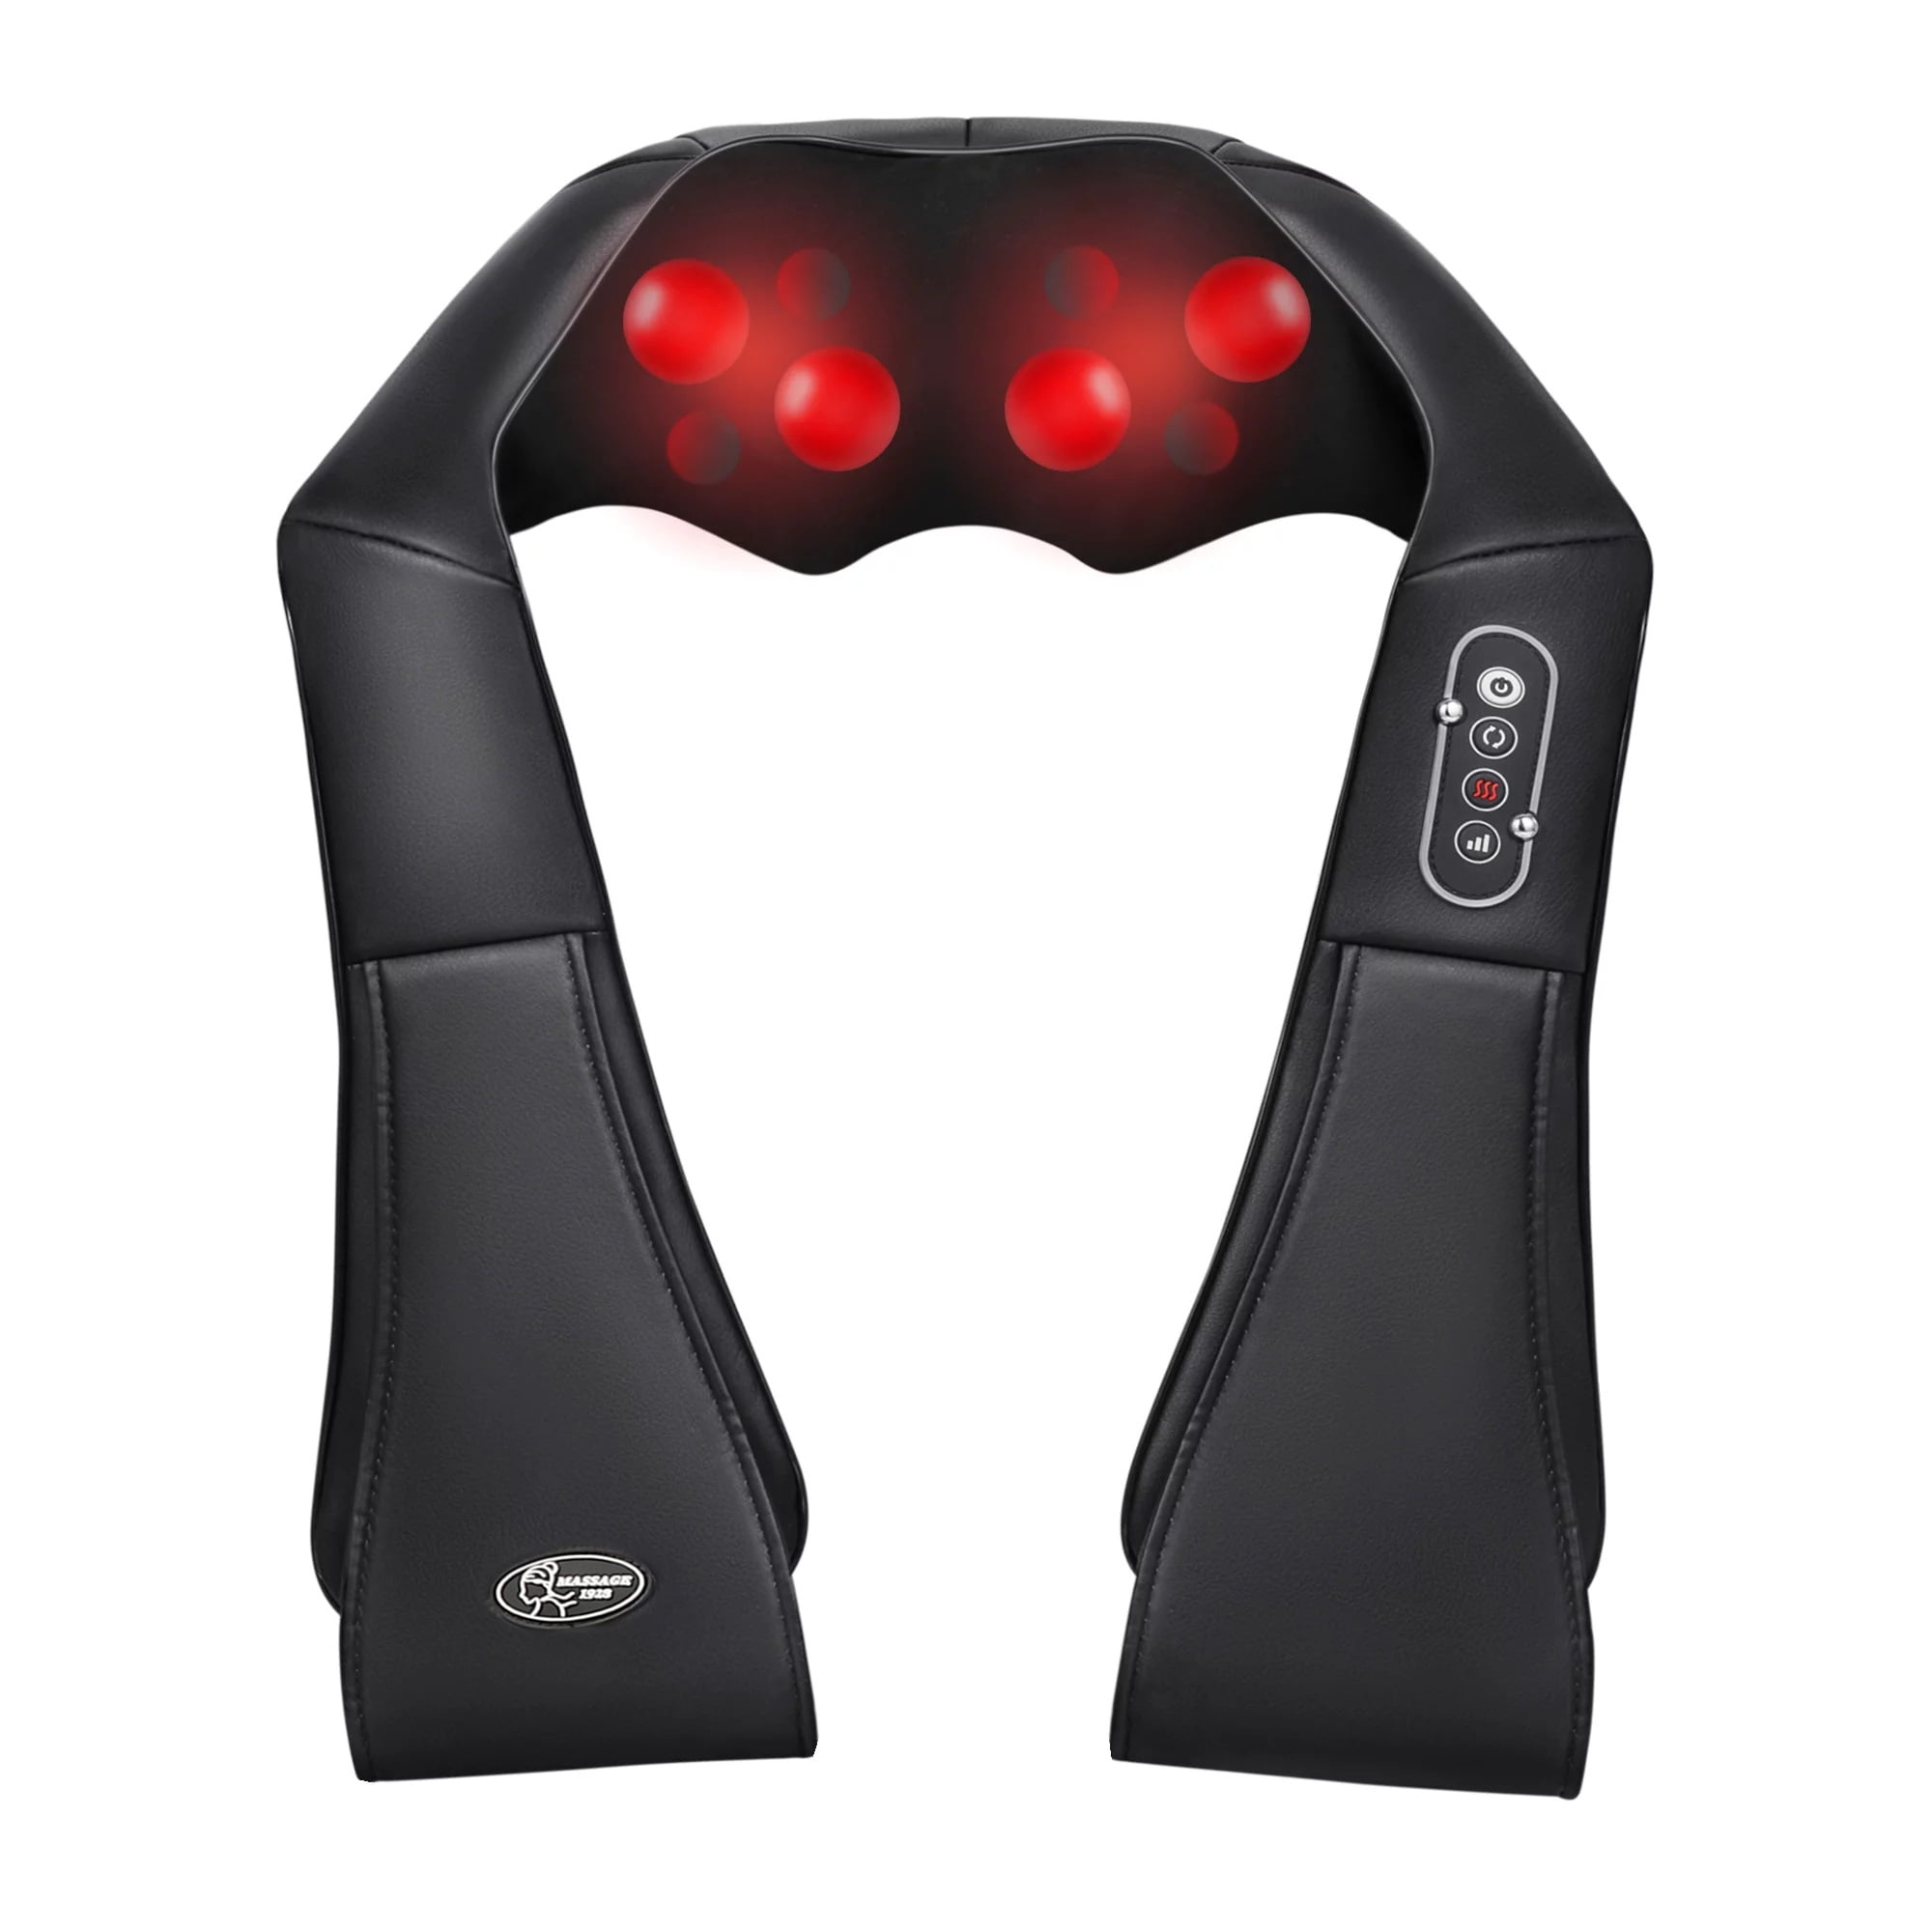 NEW Shiatsu Neck and Back Massager with Heat - health and beauty - by owner  - household sale - craigslist